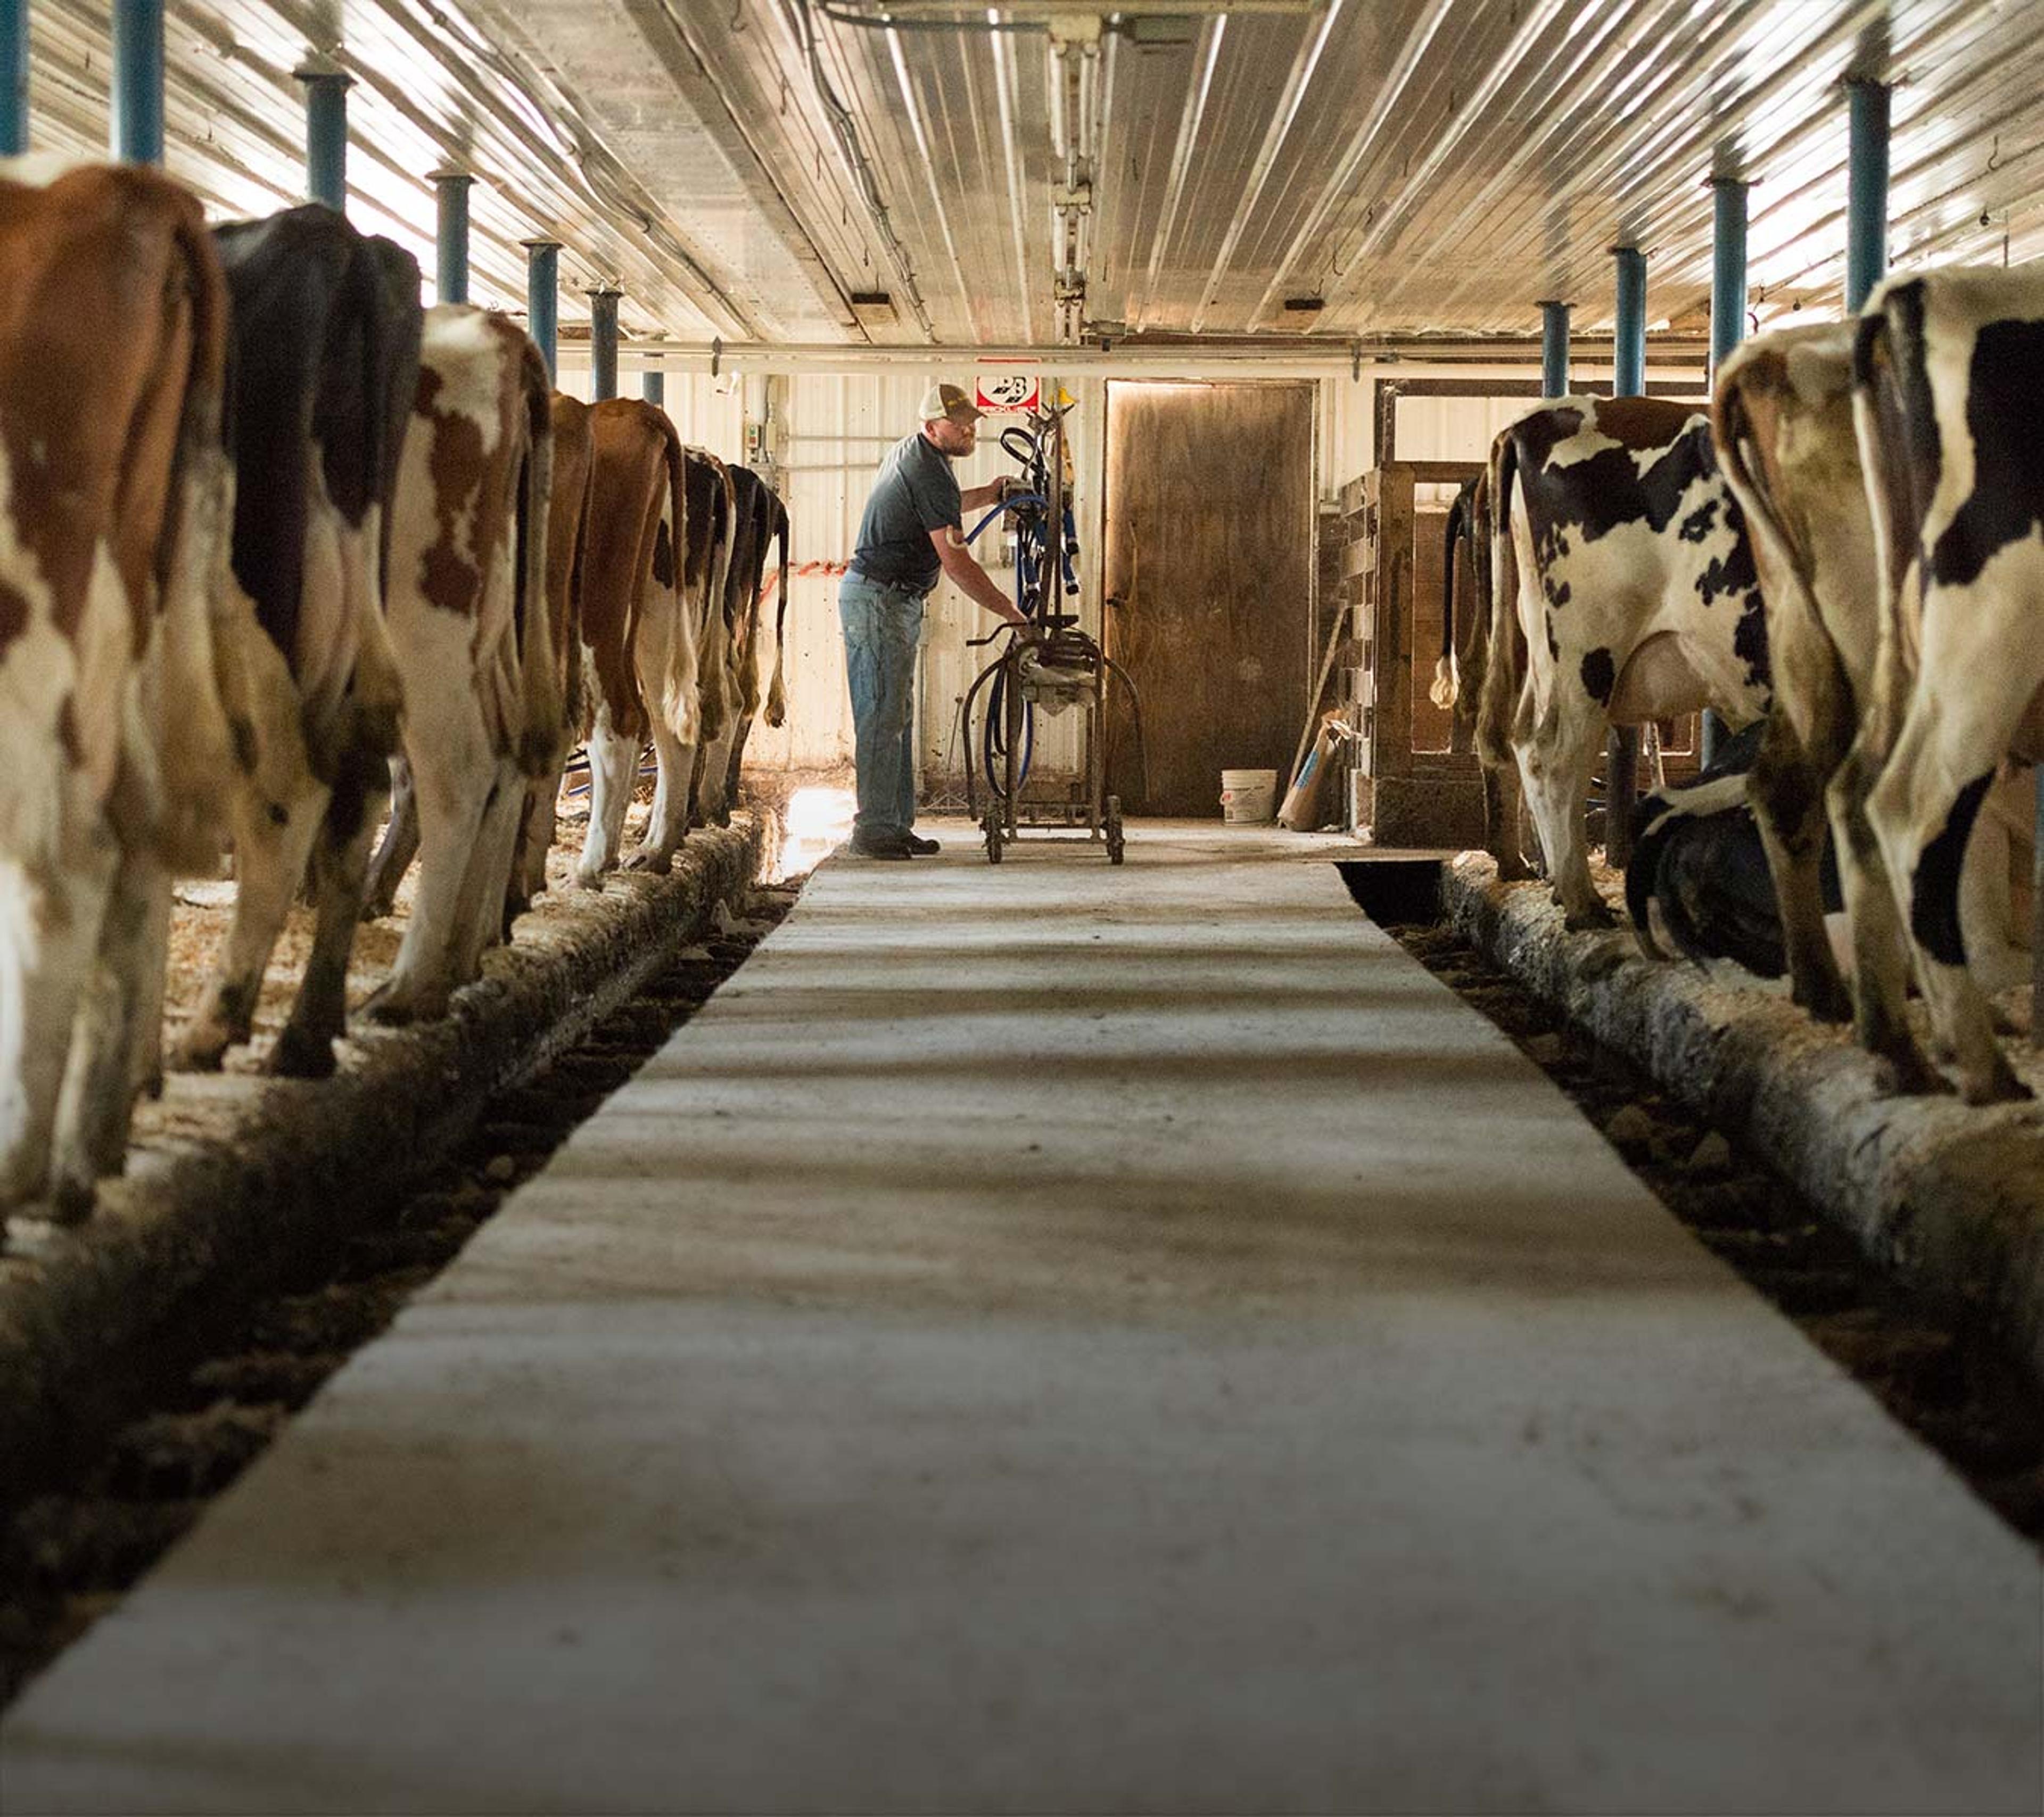 A farmer standing in the barn with his cows during milking time.